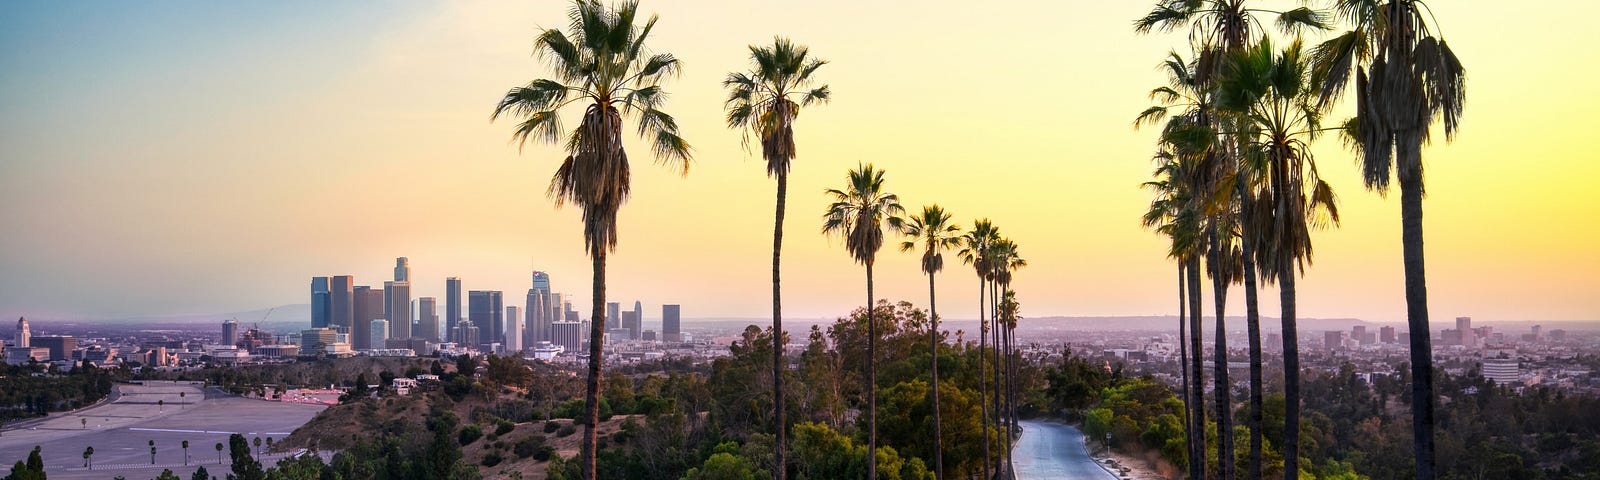 A view of the Los Angeles skyline in the background includes rows of palm trees in the foreground.